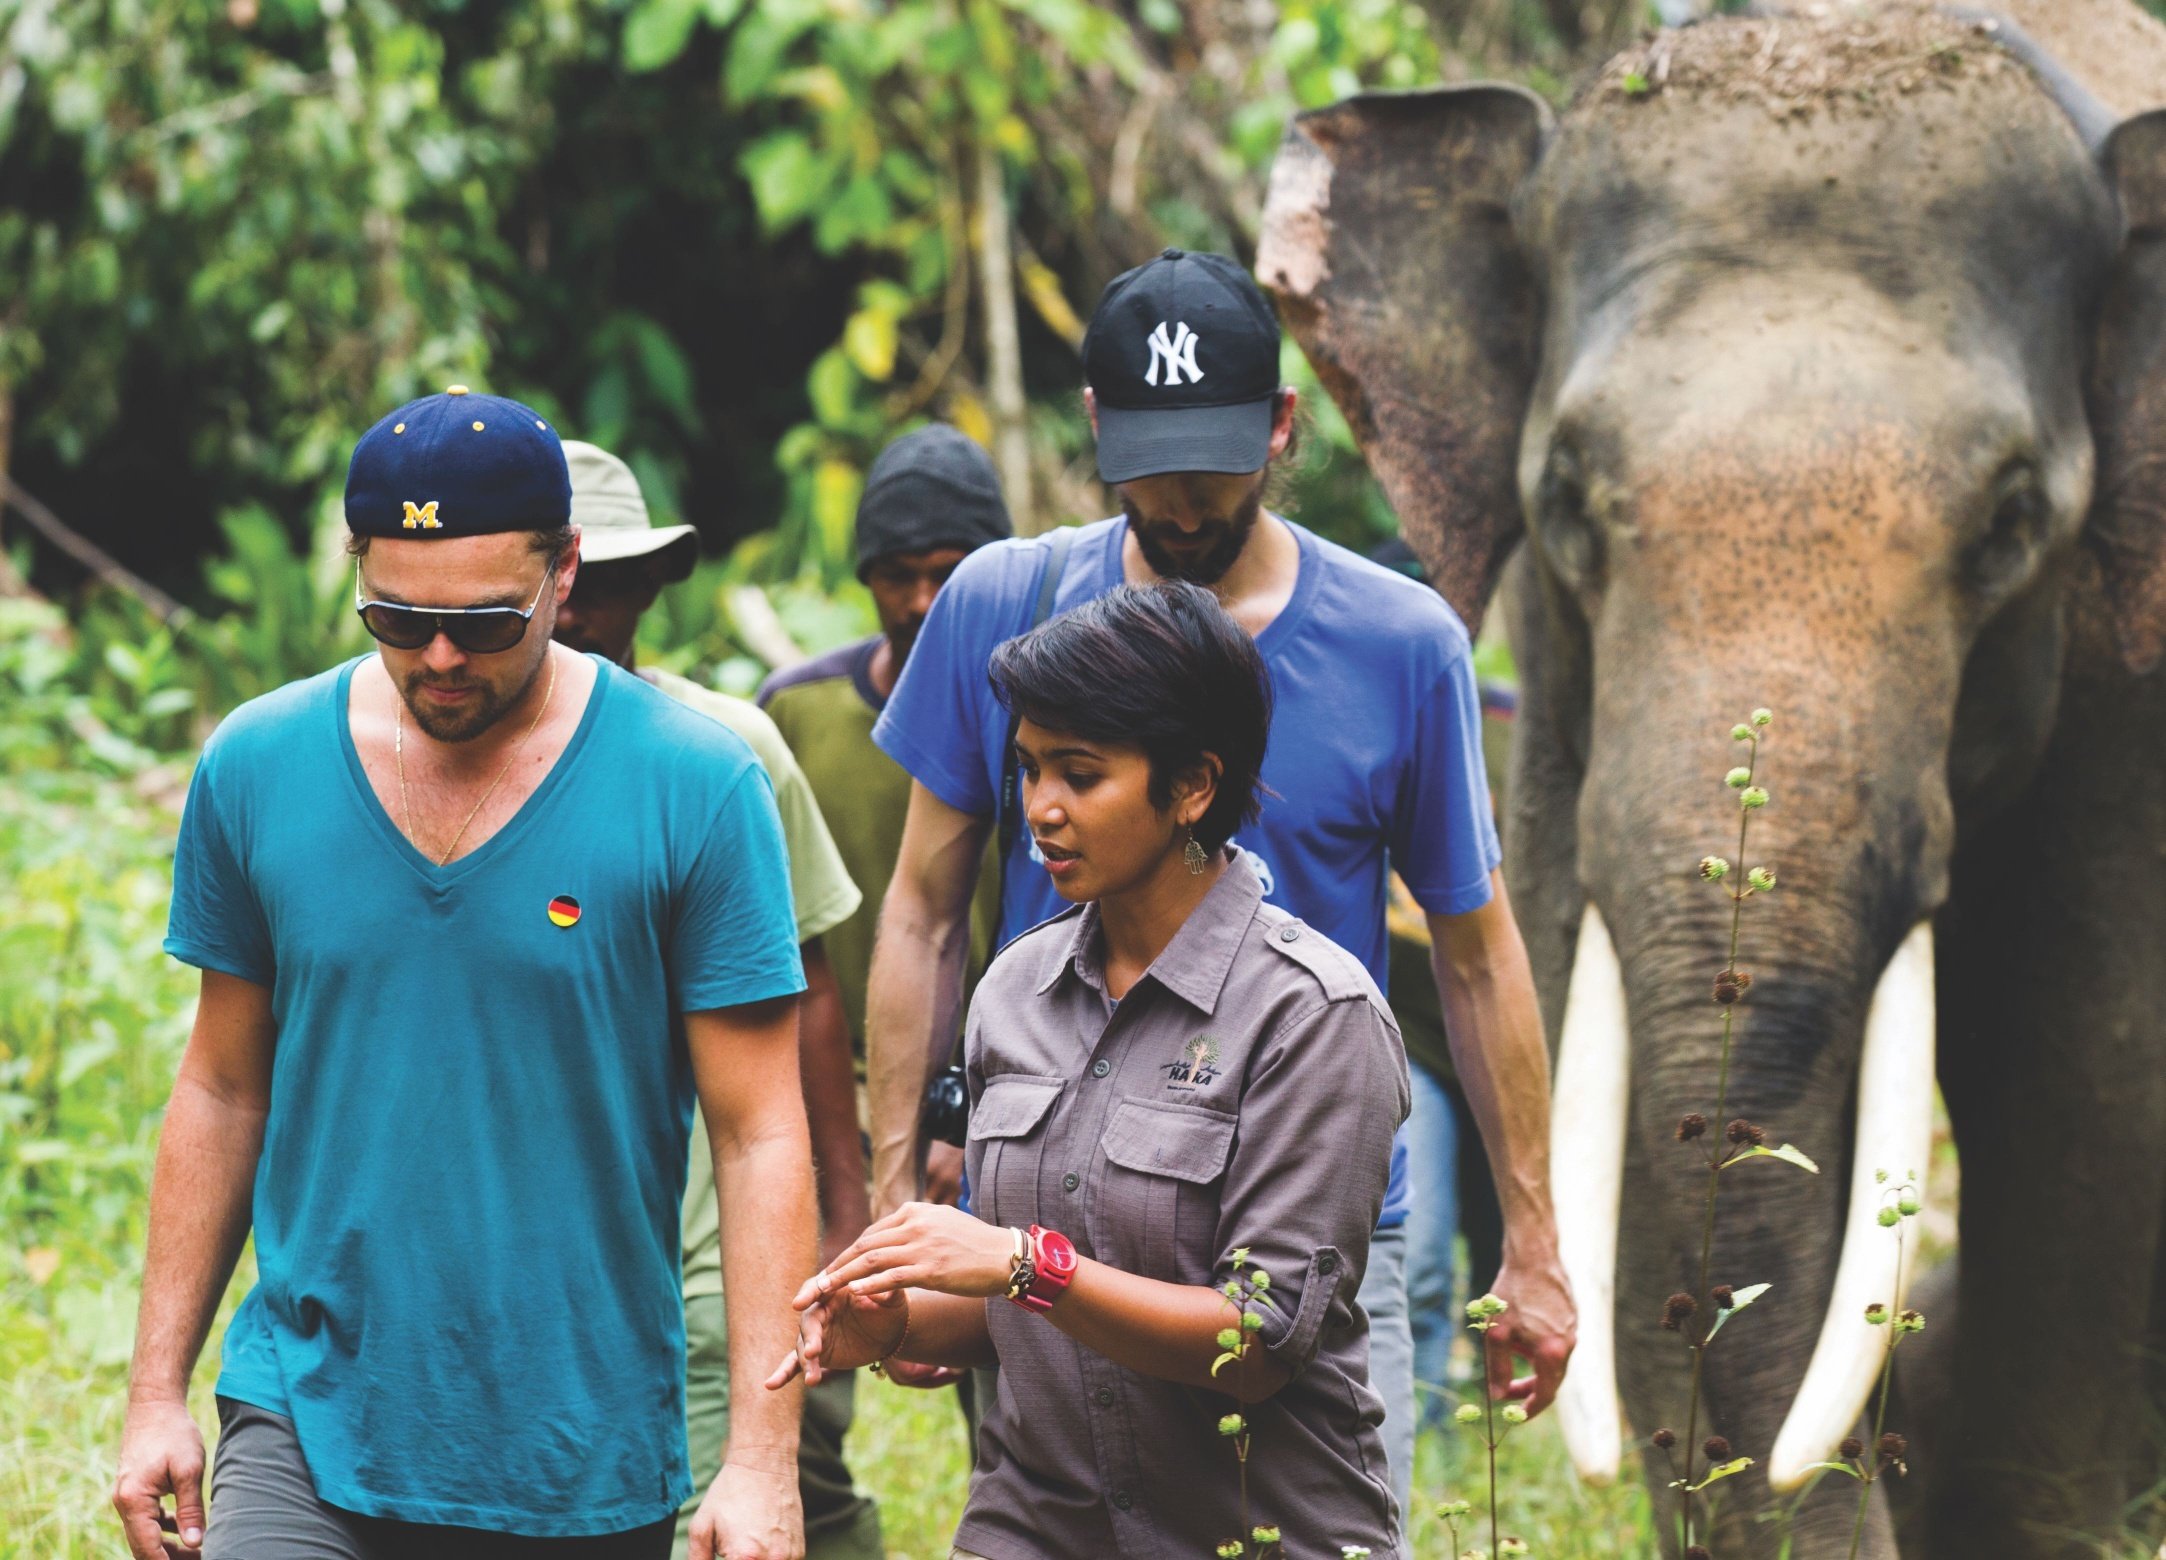 Celebrity activists like Leonardo DiCaprio, Adrien Brody and Farwiza Farhan are leading the fight to save the Leuser Ecosystem.